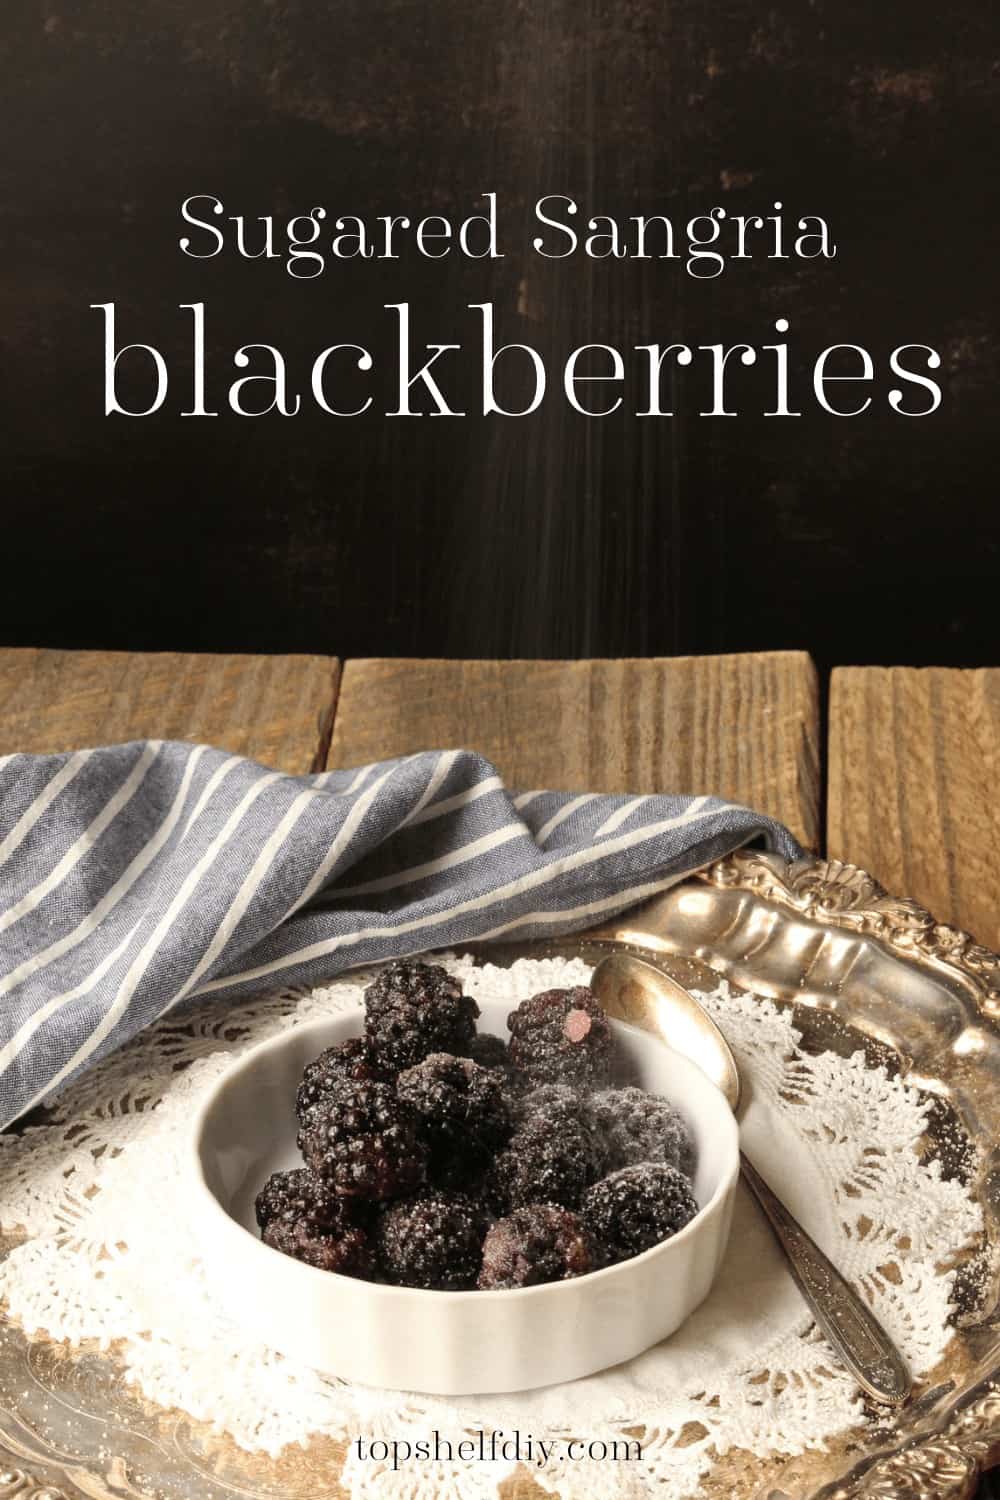 A sangria soak and light dusting of sugar make these frozen blackberries come to life as a decadent cocktail garnish. Get the easy recipe here! #boozyfruit #wineberries #momcocktails #sangriarecipe